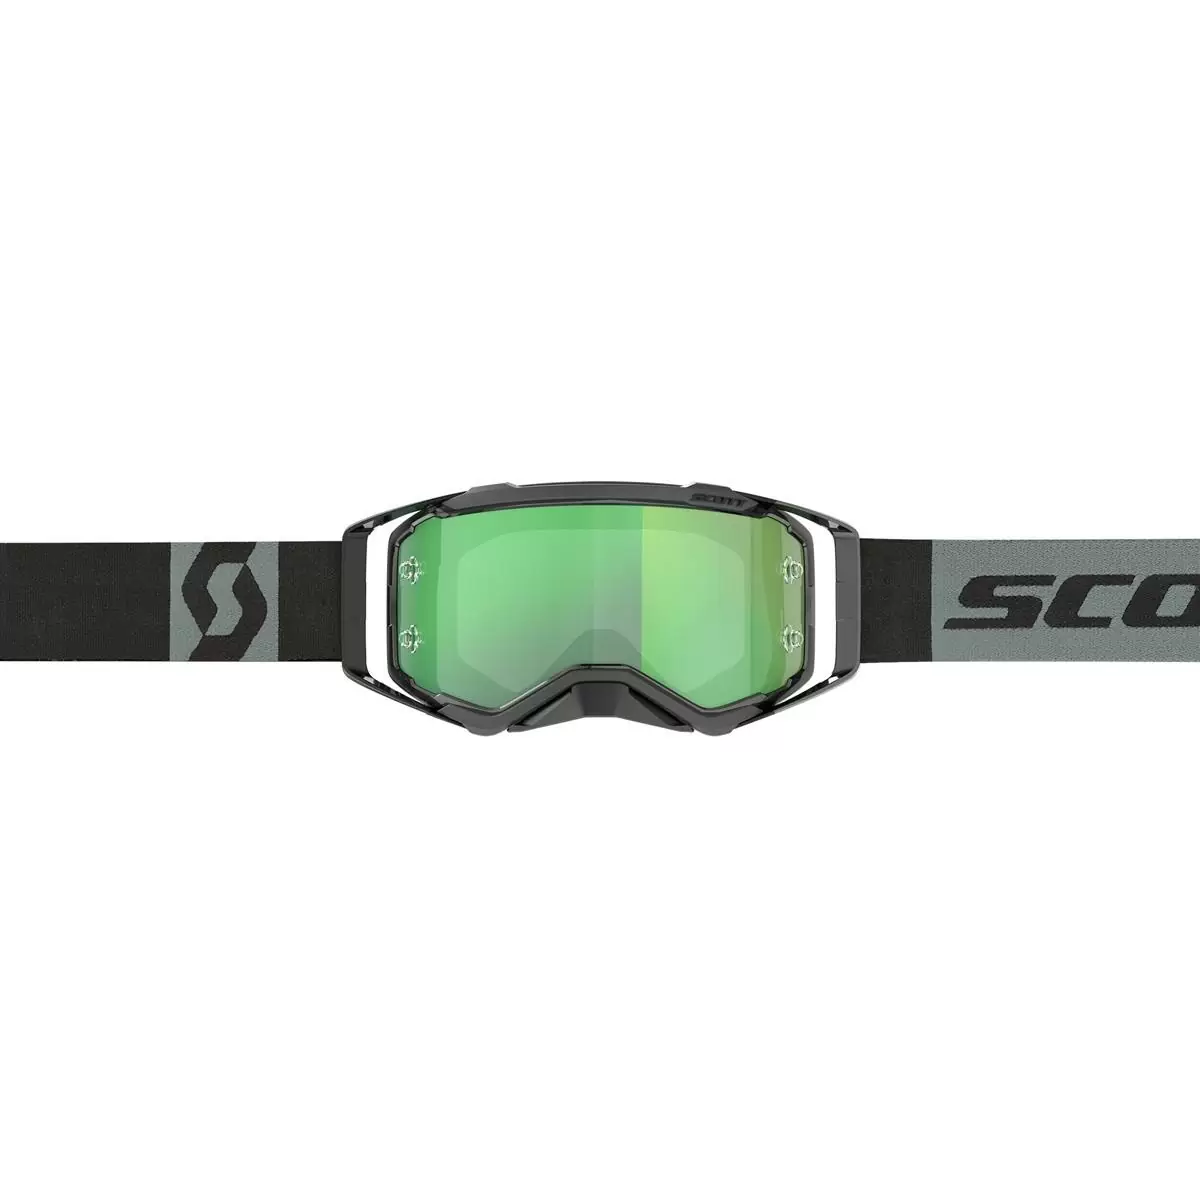 Prospect Mask Camo Grey/Black With Chrome Works Green Lens #1